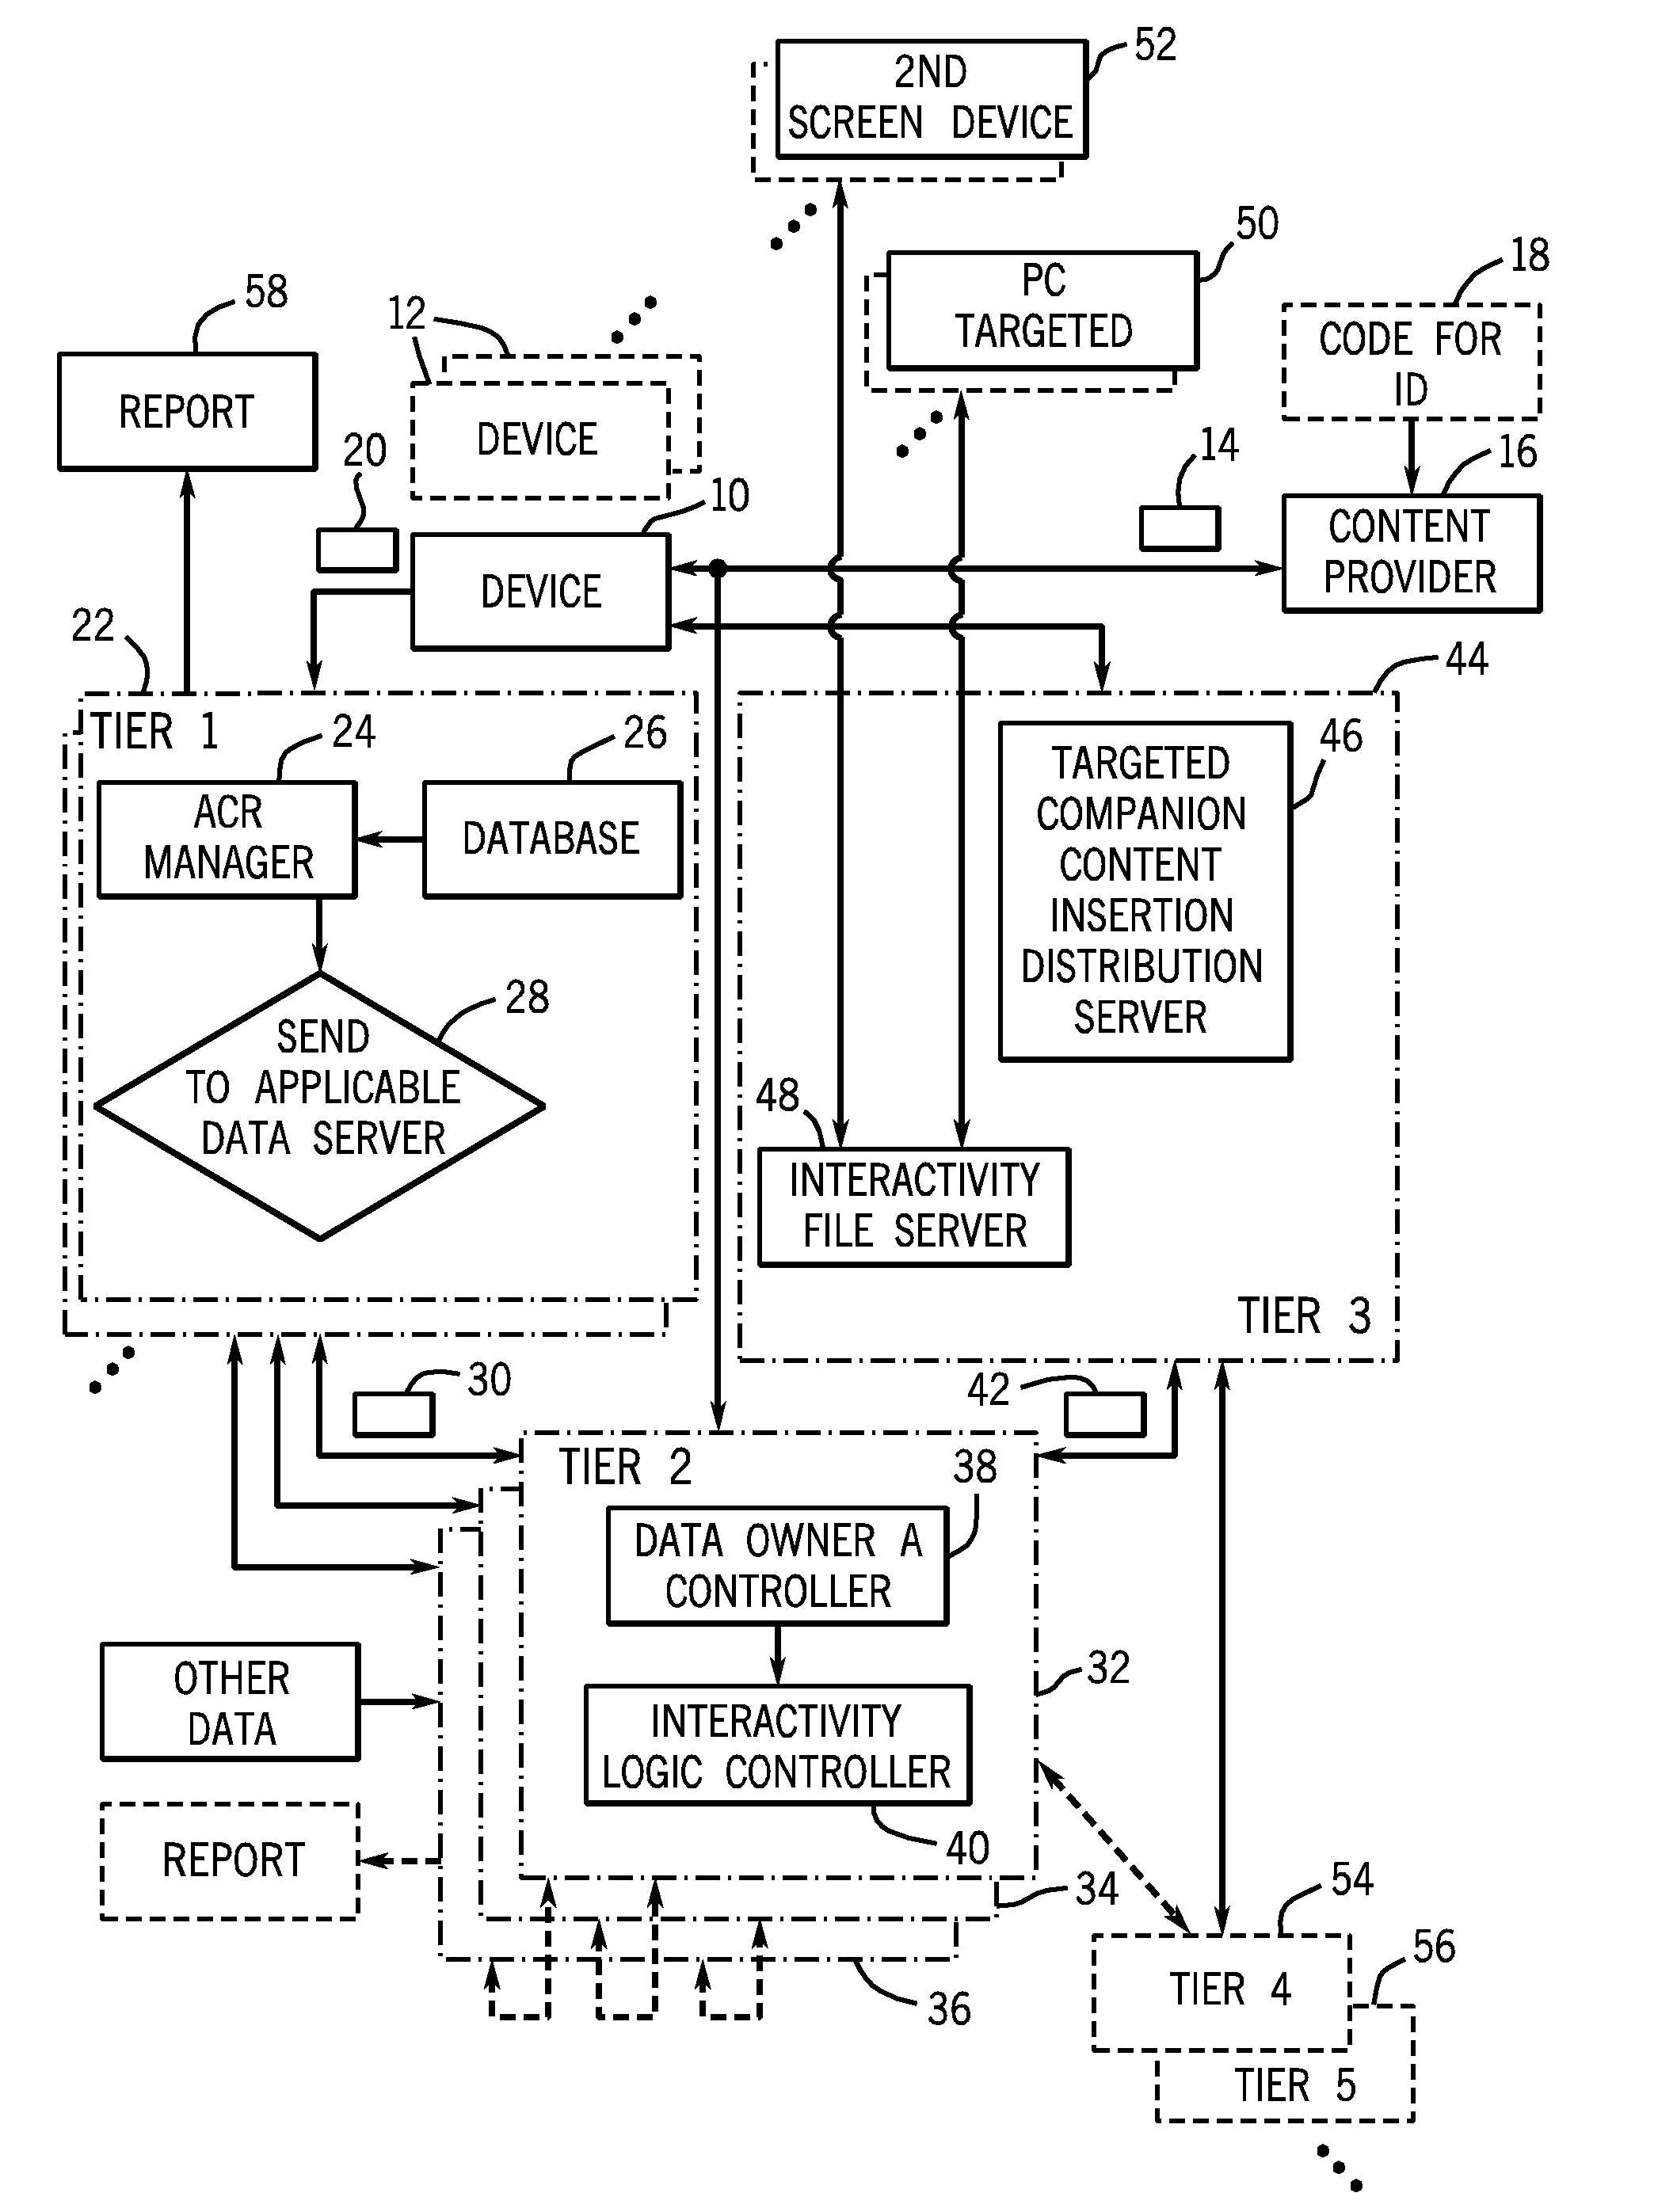 Multi-tiered automatic content recognition and processing